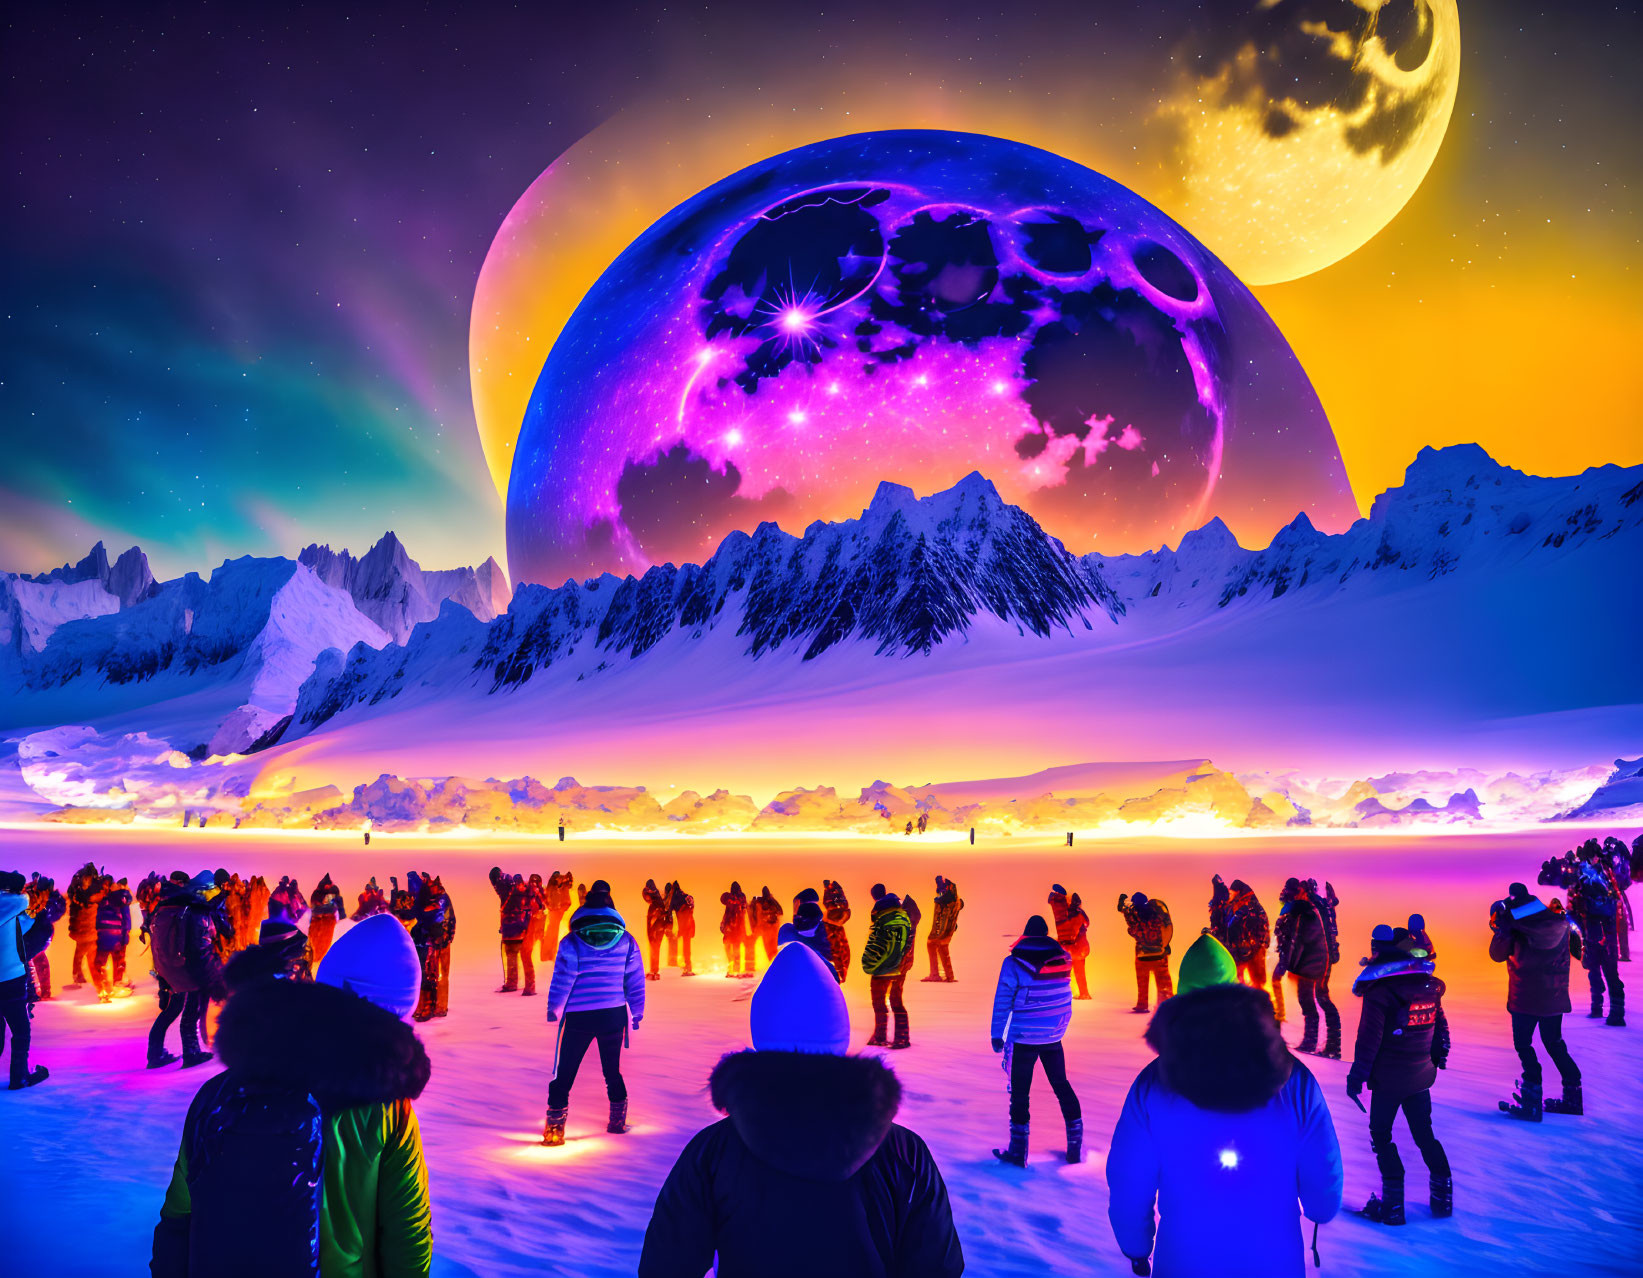 Vibrant surreal sky with massive planets and purple nebula above snowy mountain landscape at sunset